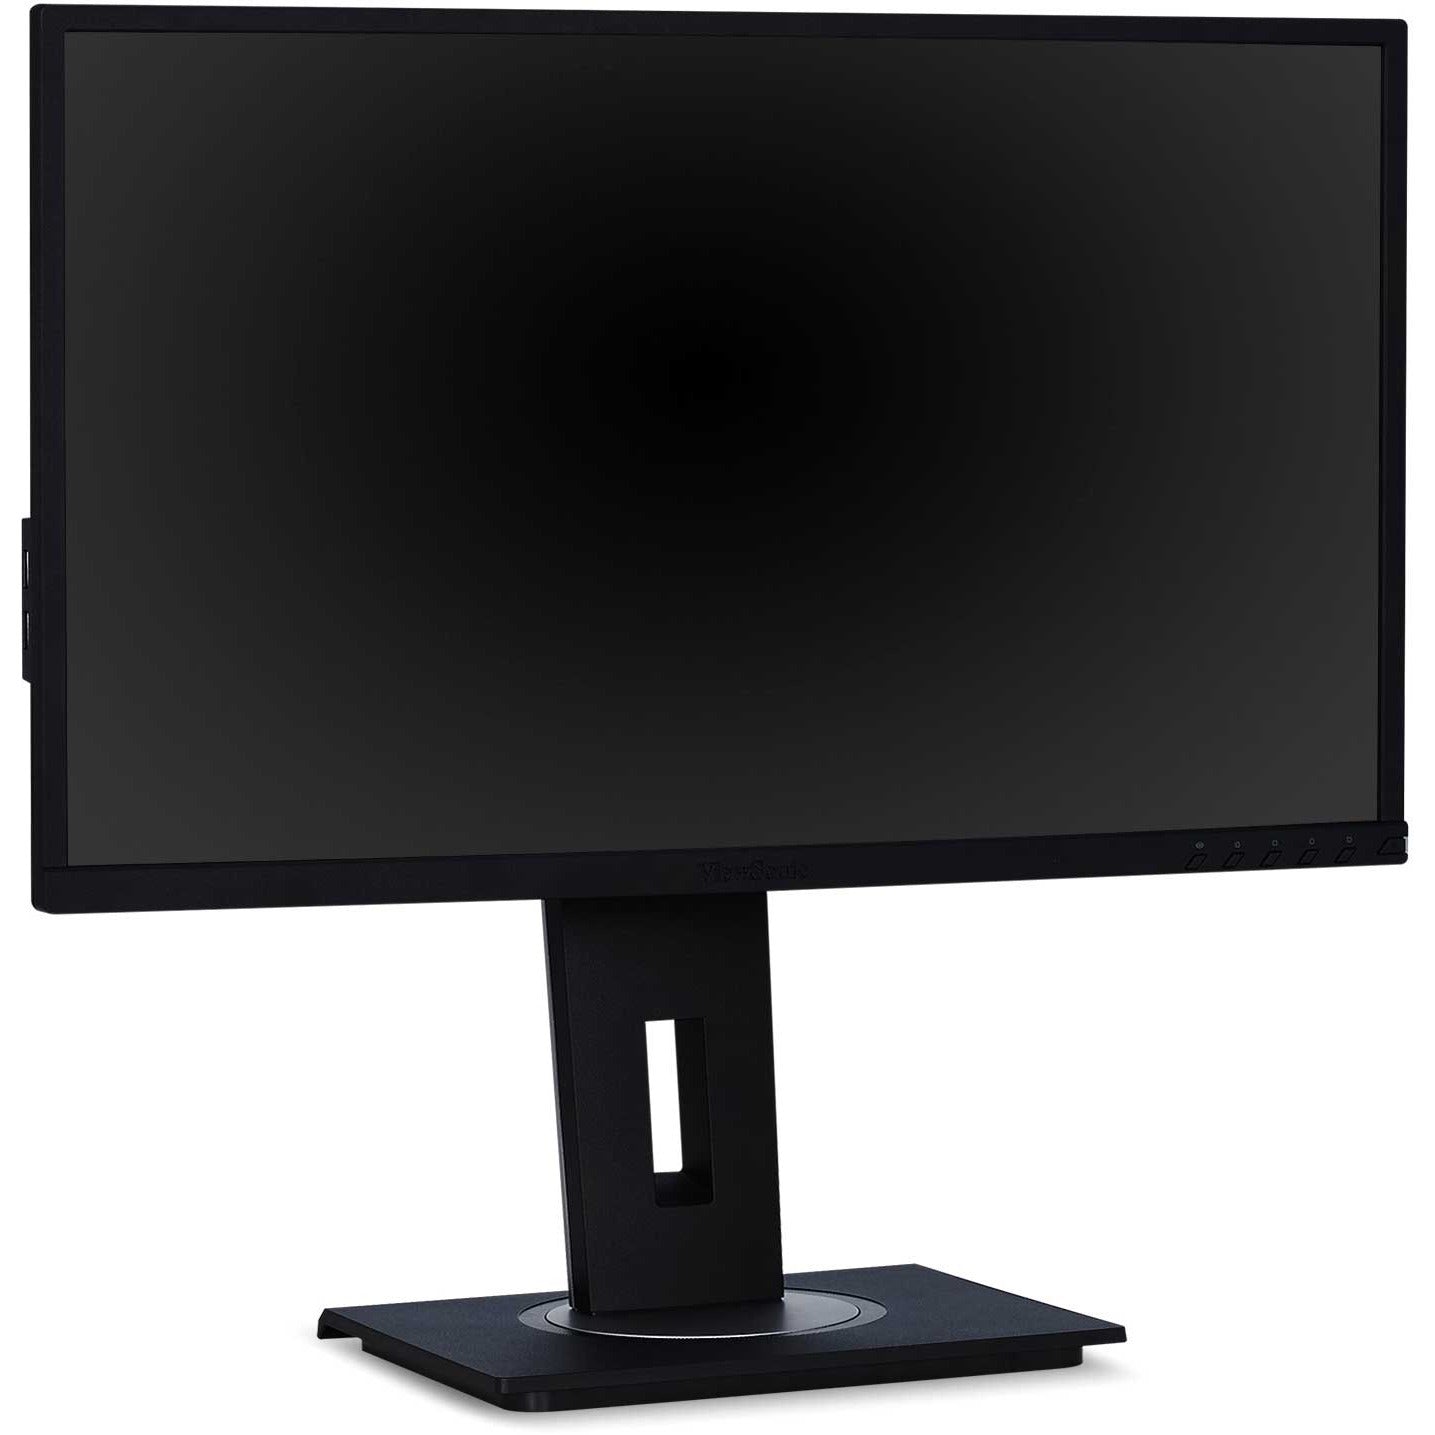 viewsonic-vg2248-22-inch-ips-1080p-ergonomic-monitor-with-hdmi-displayport-usb-and-40-degree-tilt-for-home-and-office-ergonomic-vg2248-1080p-ips-monitor-with-hdmi-displayport-usb-and-40-degree-tilt-250-cd-m2-22_vewvg2248 - 5